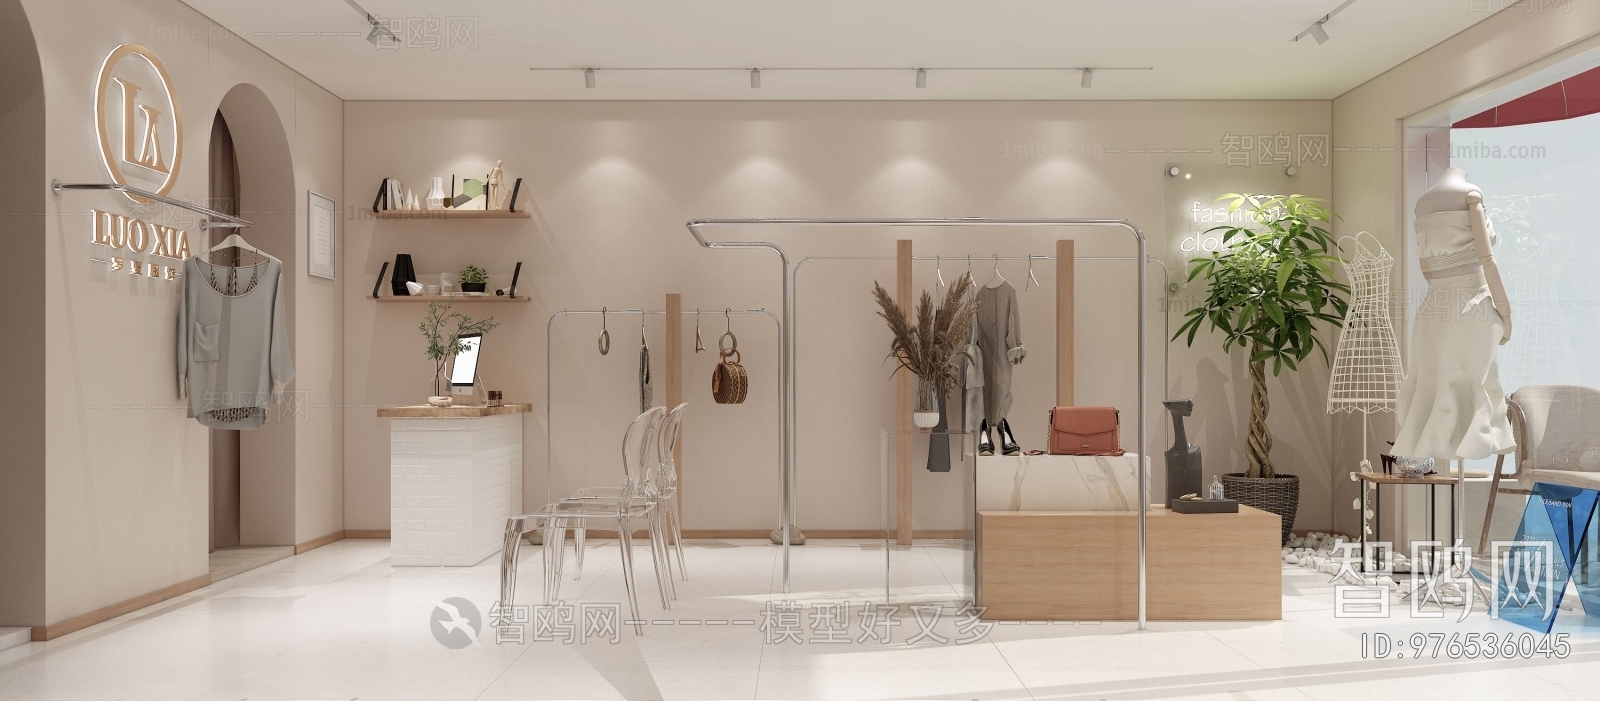 Modern Clothing Store